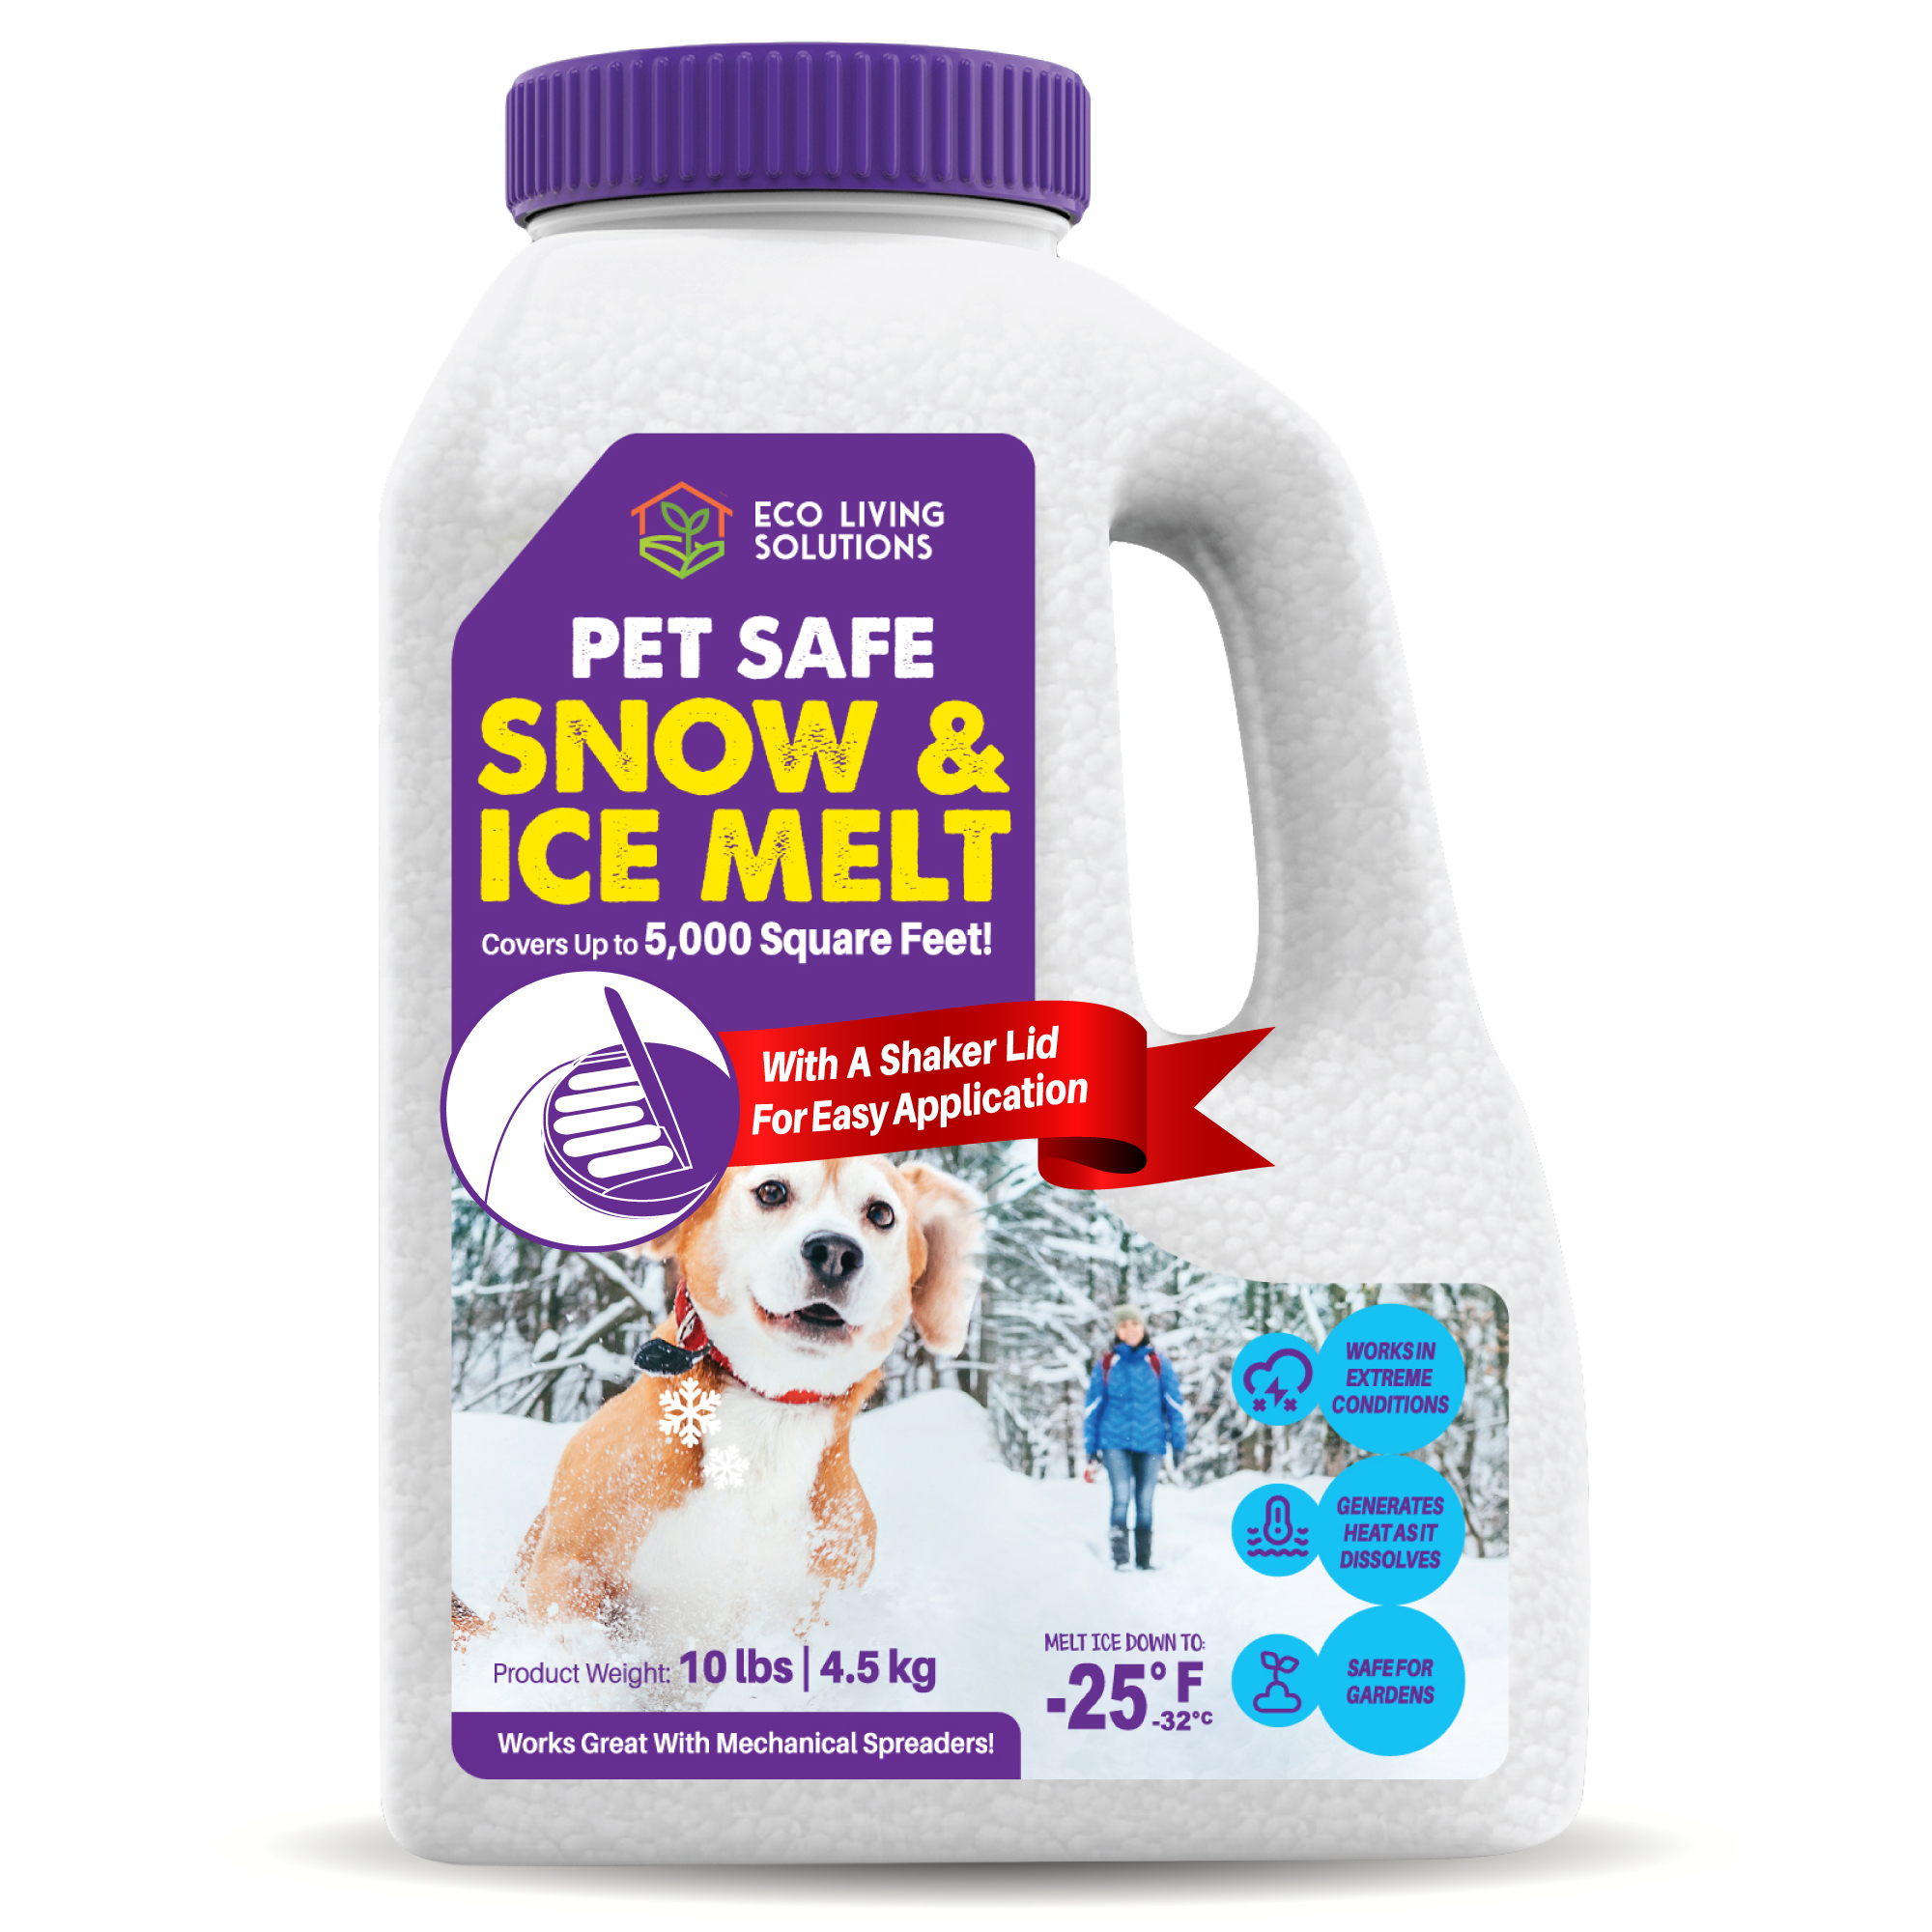 Eco Living Pet Safe Snow and Ice Melt better than Sodium